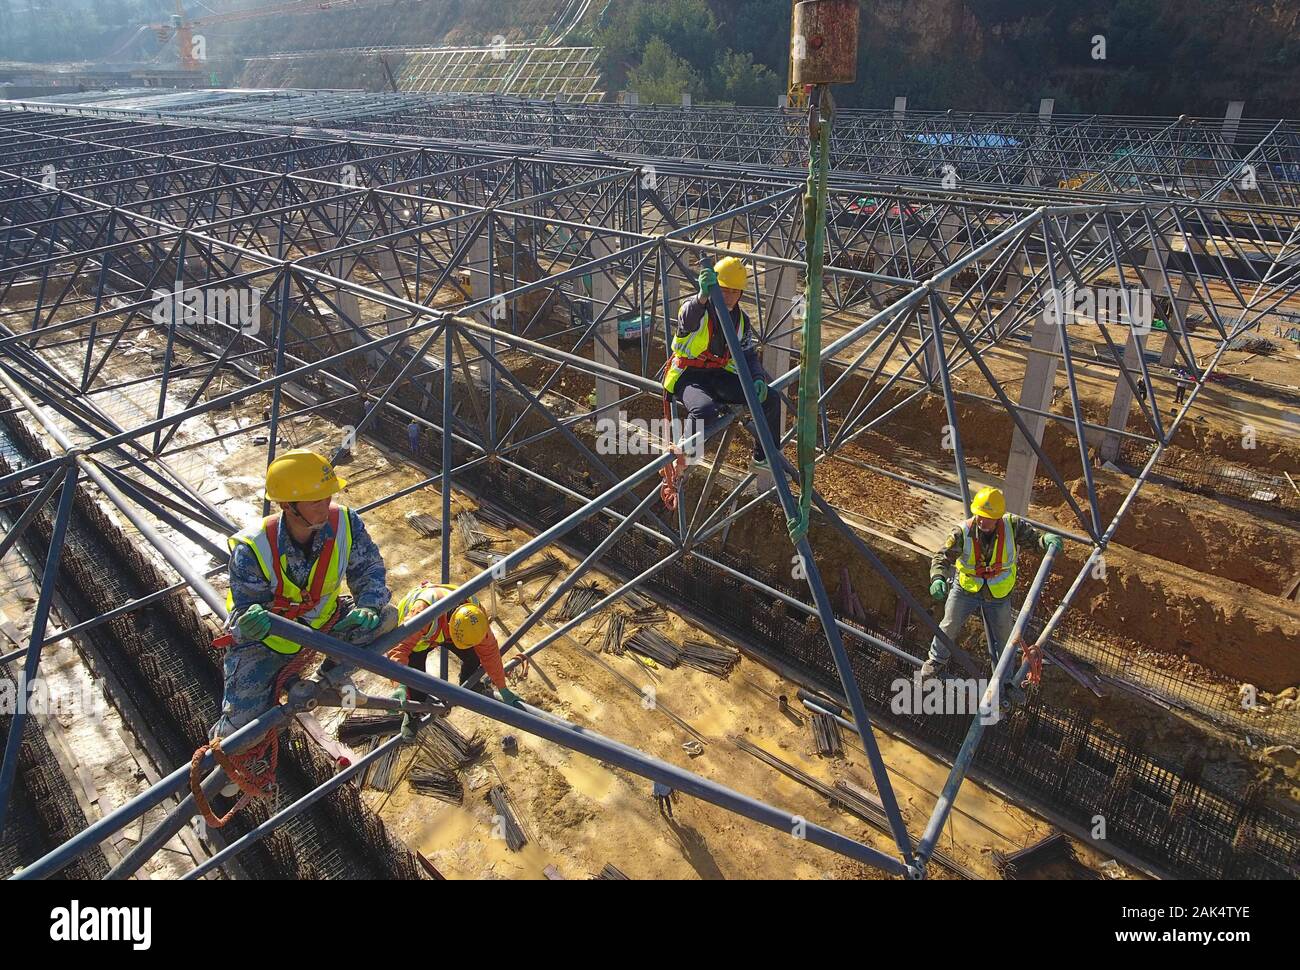 Kunming, China's Yunnan Province. 7th Jan, 2020. People work at the construction site of Guangwei parking lot of Kunming Rail Transit Line 4 in Kunming, southwest China's Yunnan Province, Jan. 7, 2020. Credit: Yang Zongyou/Xinhua/Alamy Live News Stock Photo